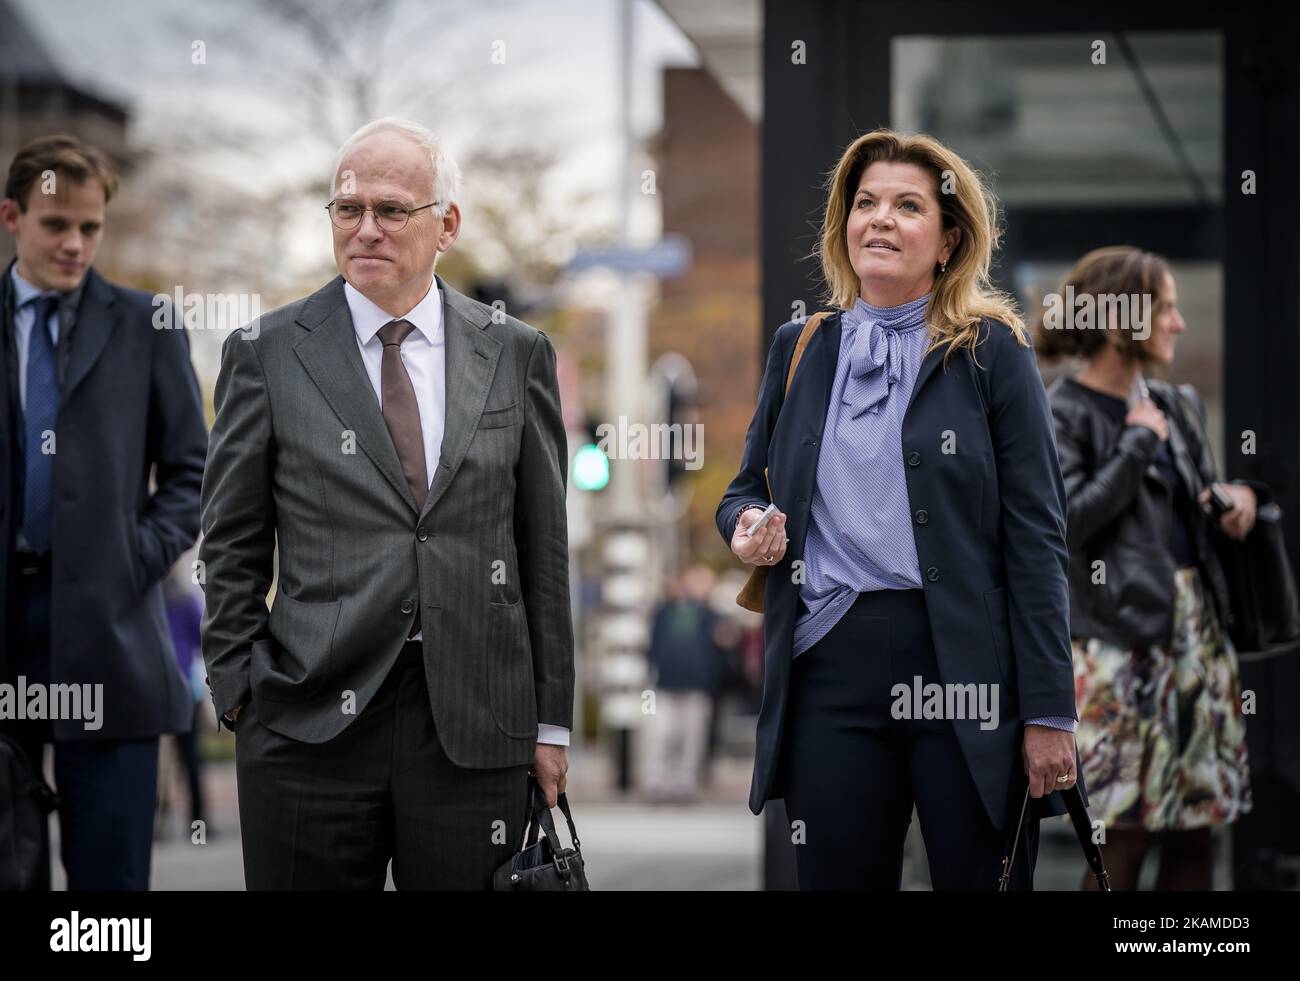 2022-11-03 15:42:48 THE HAGUE - Piet Adema, Minister of Agriculture, Nature and Food Quality, and Christianne van der Wal-Zeggelink, Minister for Nature and Nitrogen, walk to the House of Representatives to start the debate on Johan Remkes' Stokstof report. ANP BART MAAT netherlands out - belgium out Stock Photo